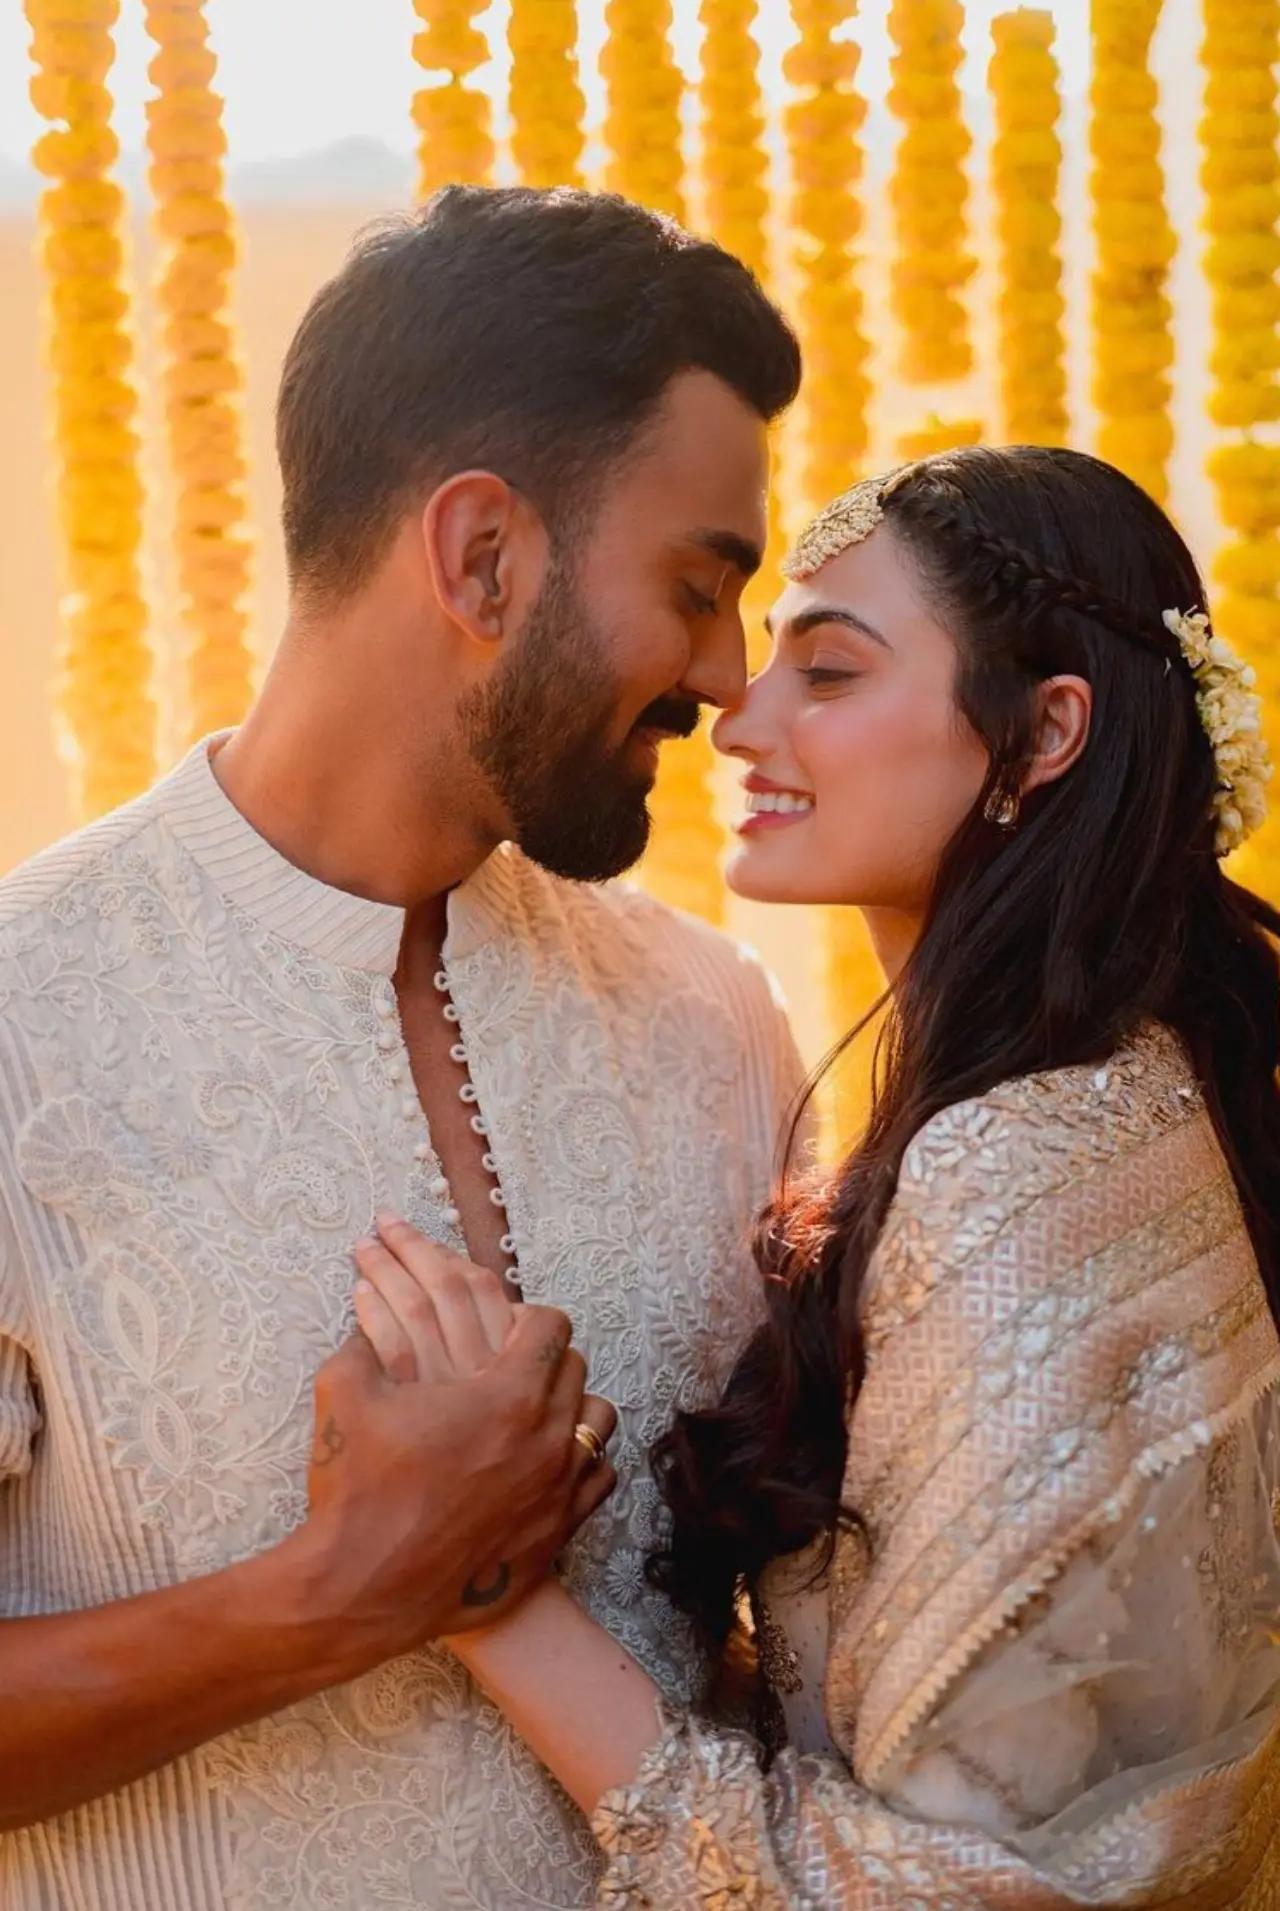 Rahul also shared a romantic picture with Athiya which was clicked before the haldi ceremony. The couple looked at each other lovingly, in the picture